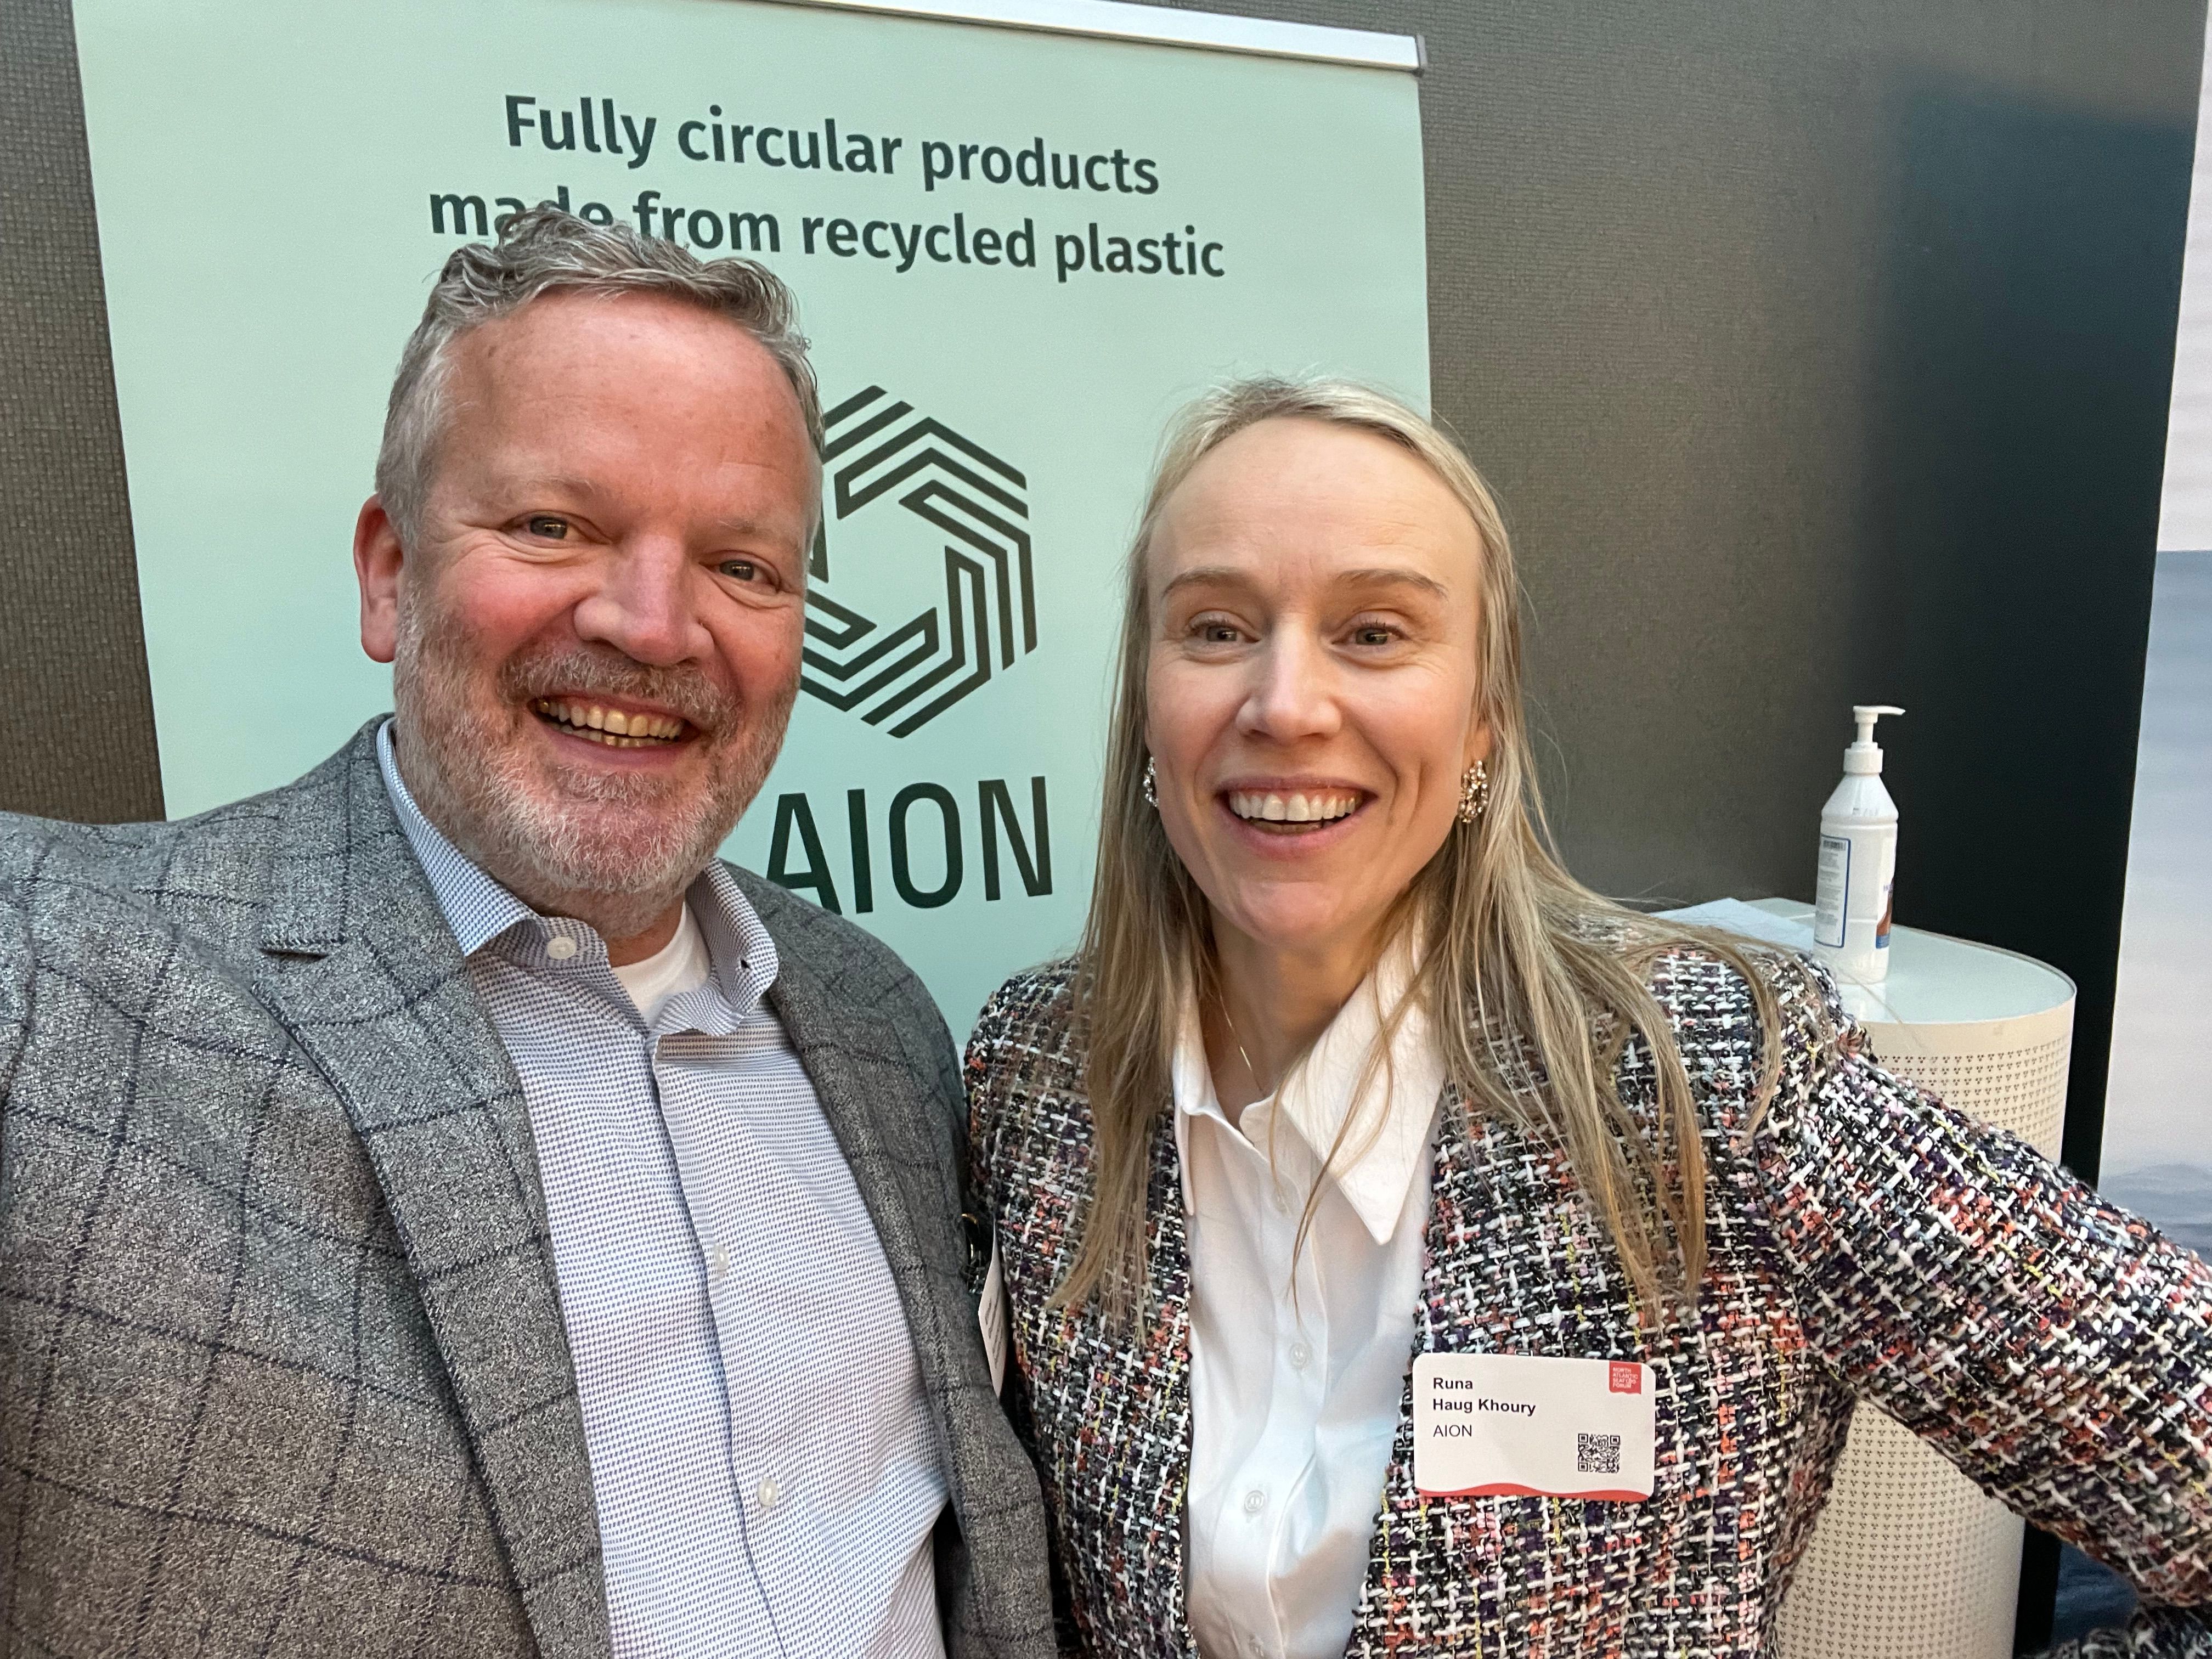 Einar Gustafsson, CEO of American Seafoods Company and Runa Haug Khoury, CEO of AION